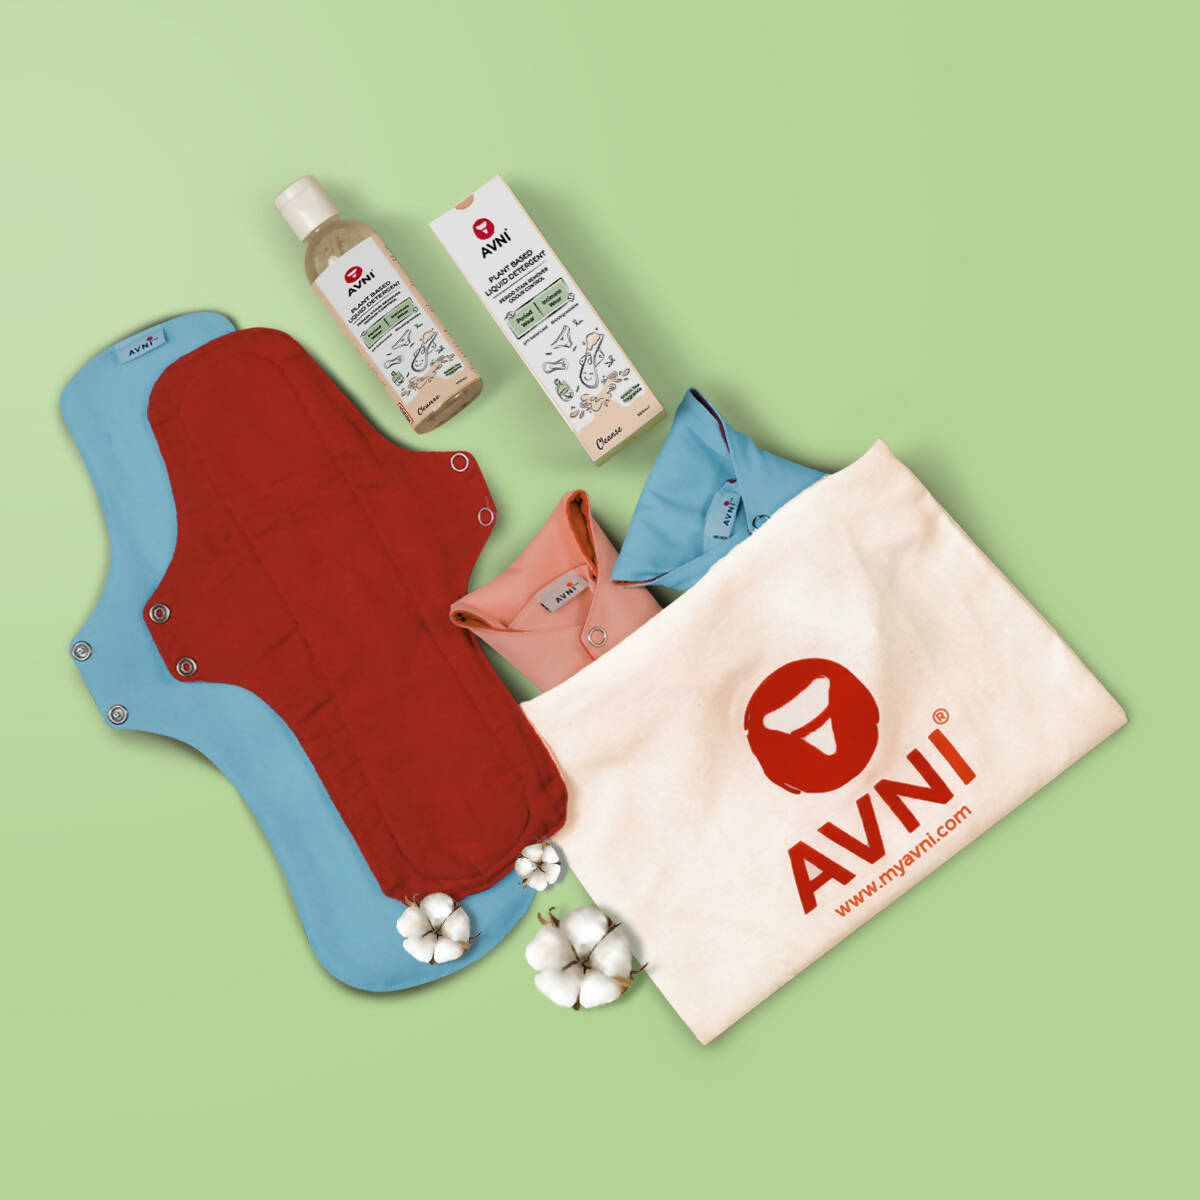 Avni Lush Certified 100% Organic Cotton Washable Cloth Pads, 2 R + 2 L (2 X 240MM + 2 X 280MM, Pack of 4) + Avni Plant Based Liquid Detergent, Period/Inner Wear Wash- 100ml (Combo Pack of 5) Wemy Store